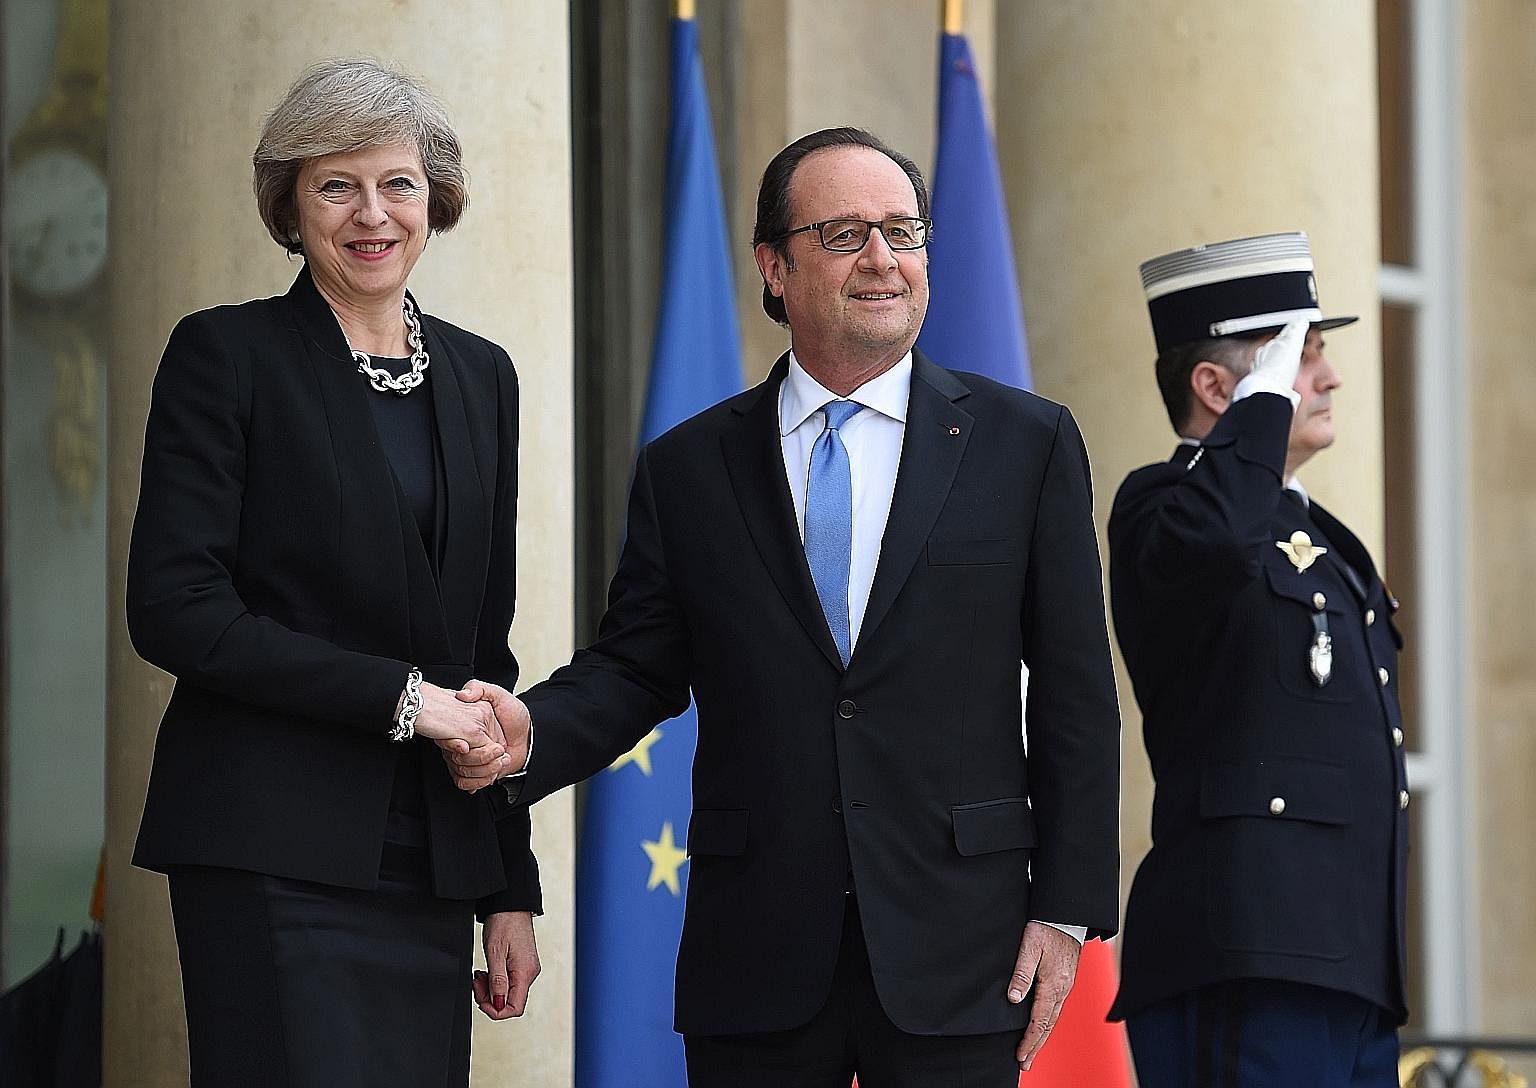 Mr Hollande welcoming Mrs May to the presidential Elysee Palace on Thursday.